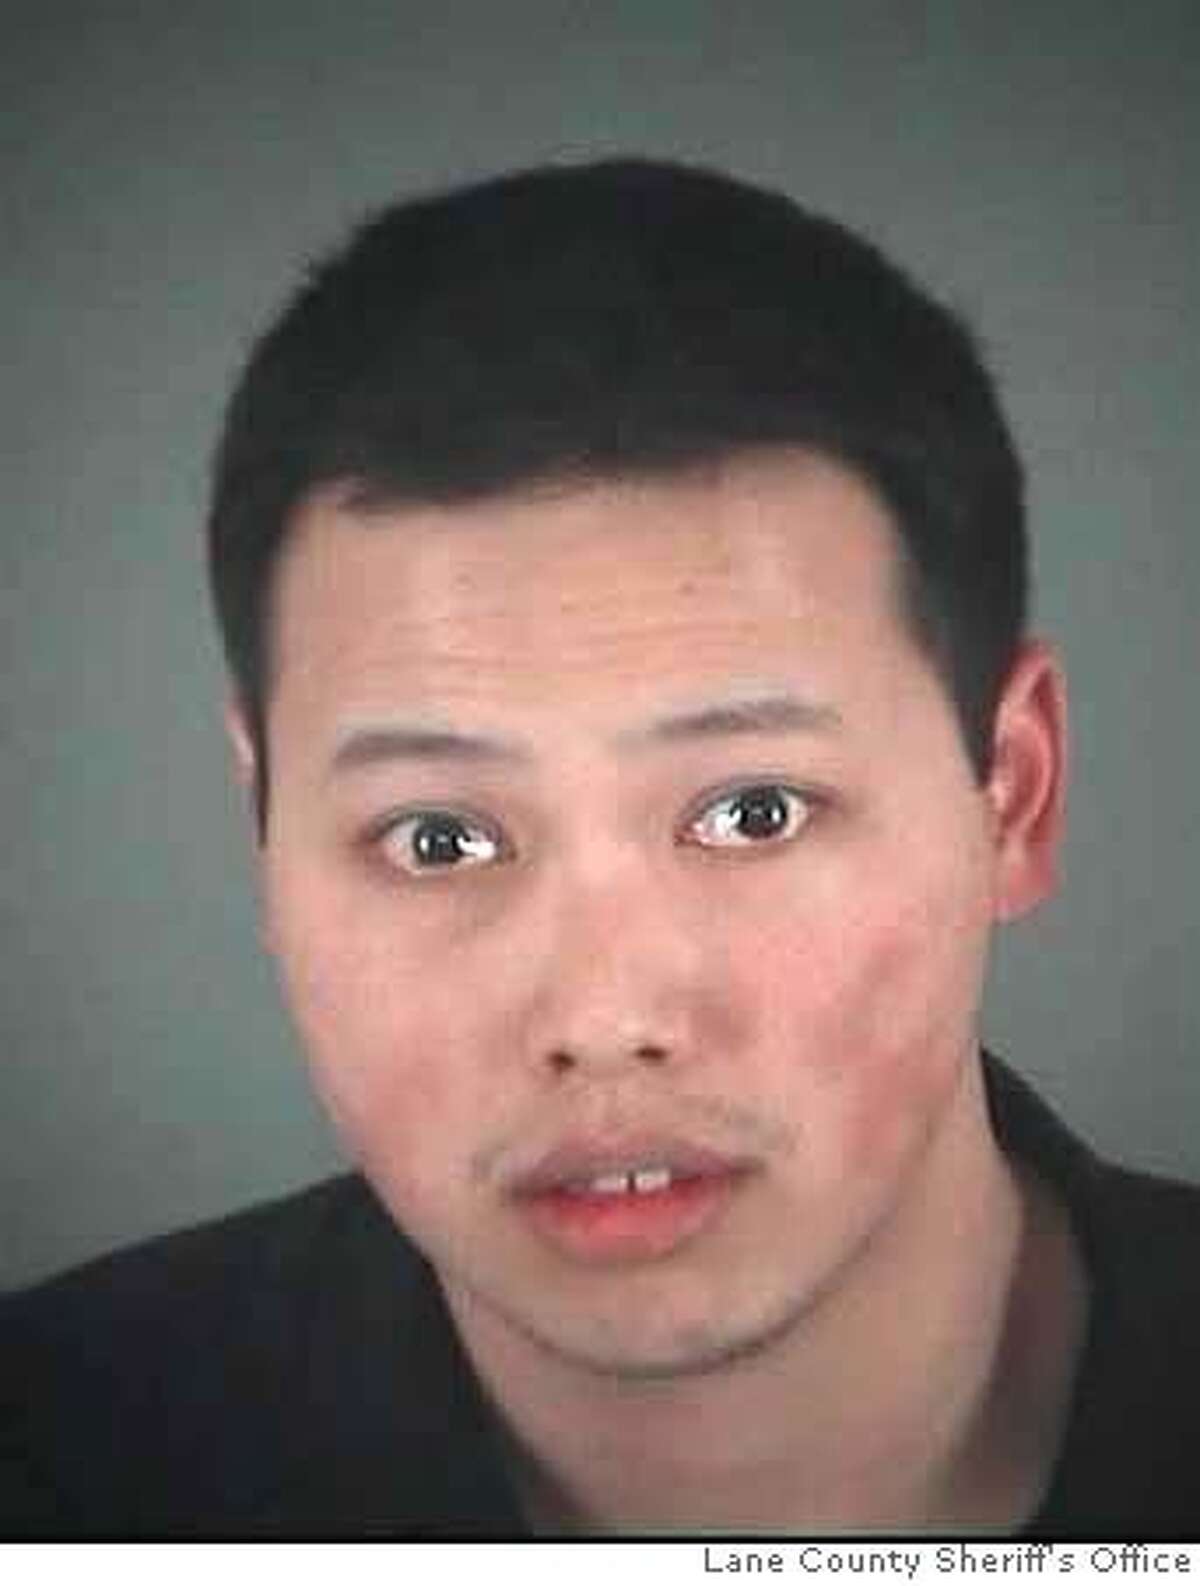 Booking mug for Joseph Hokai Tang for VIOLIN21. Provided by the Lane County Sheriff's Office in Oregon. Ran on: 12-21-2007 Joseph Tang